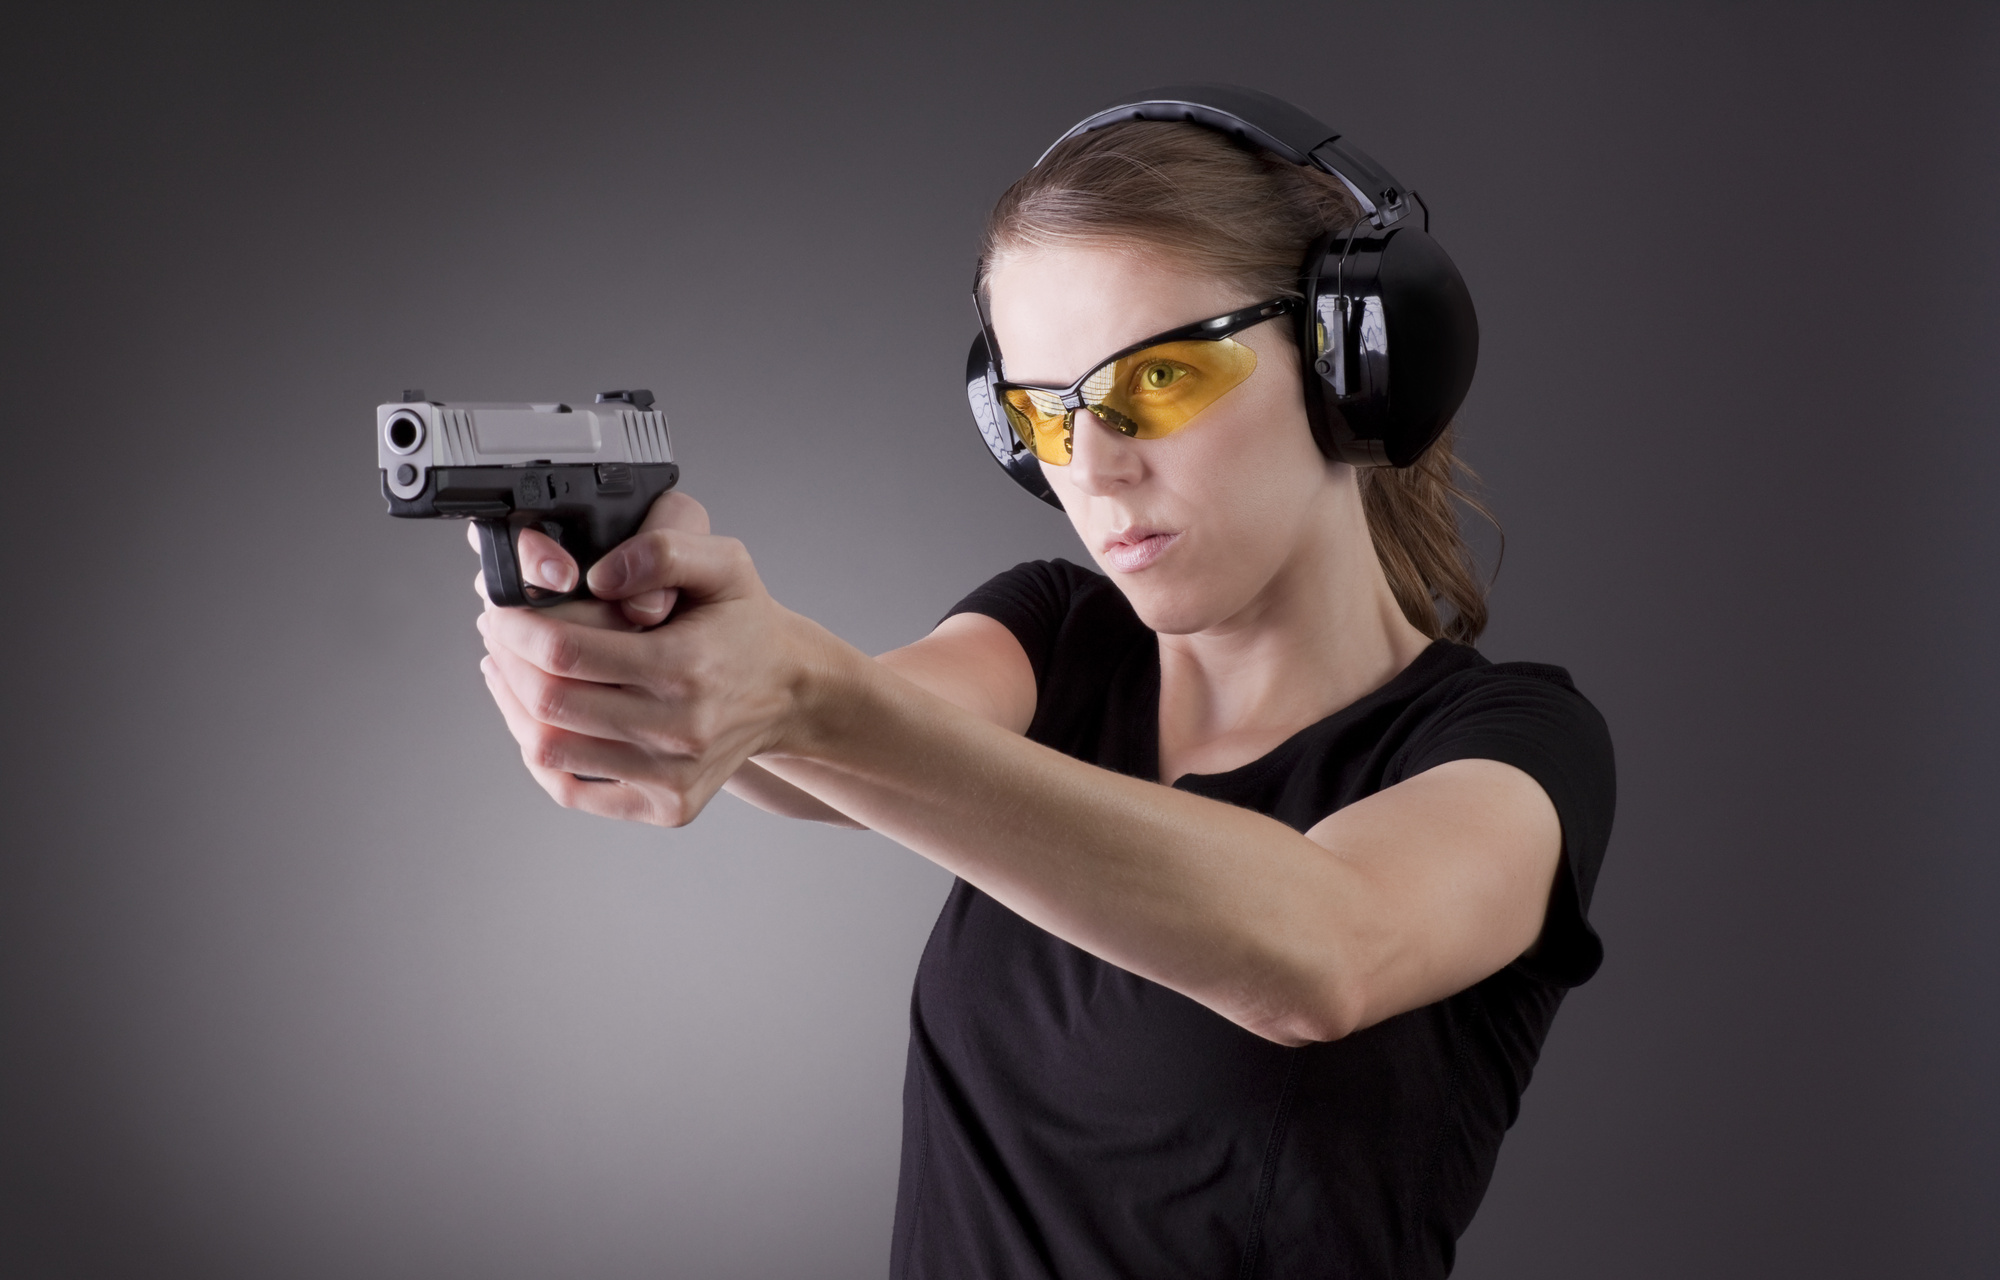 5 Things You Should Consider Before You Buy a Firearm